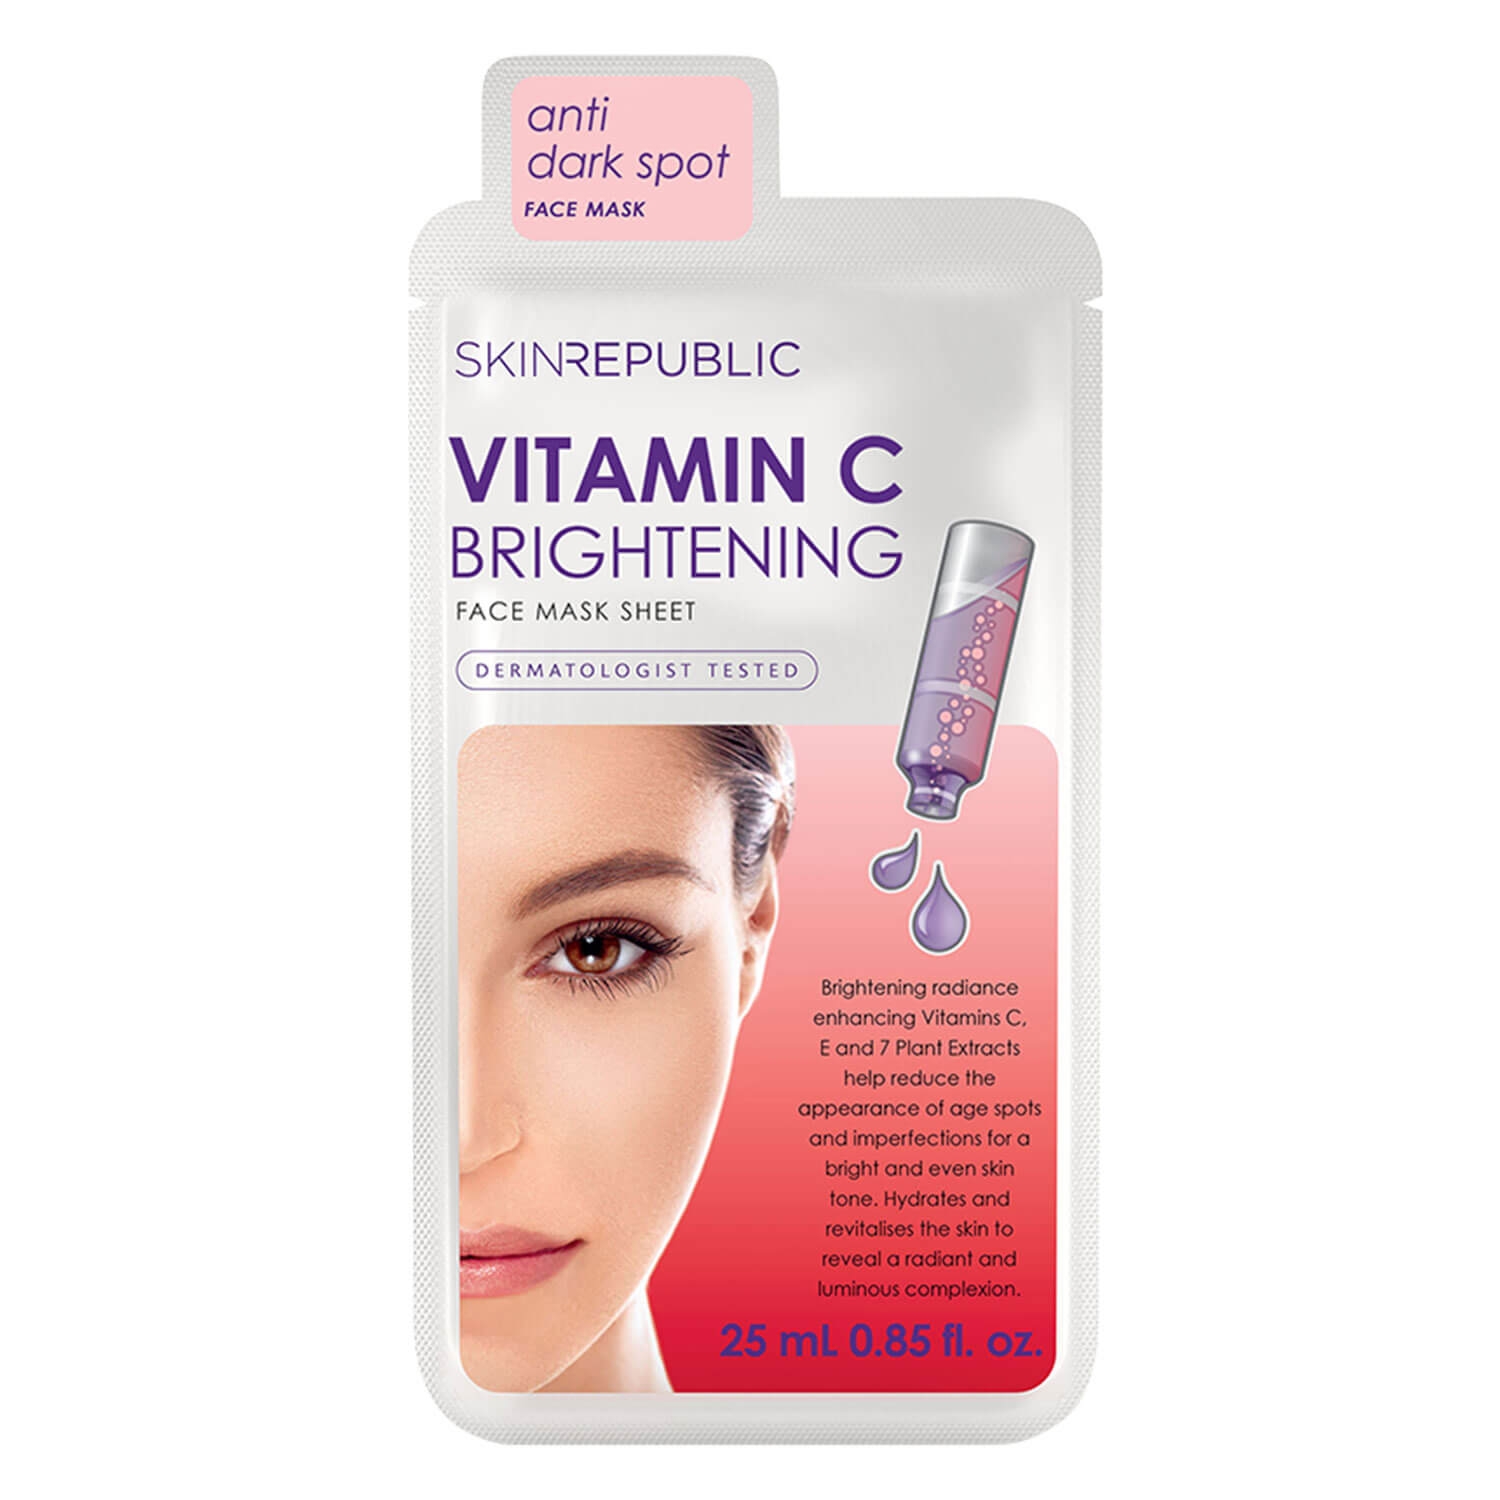 Product image from Skin Republic - Brightening Vitamin C Face Mask